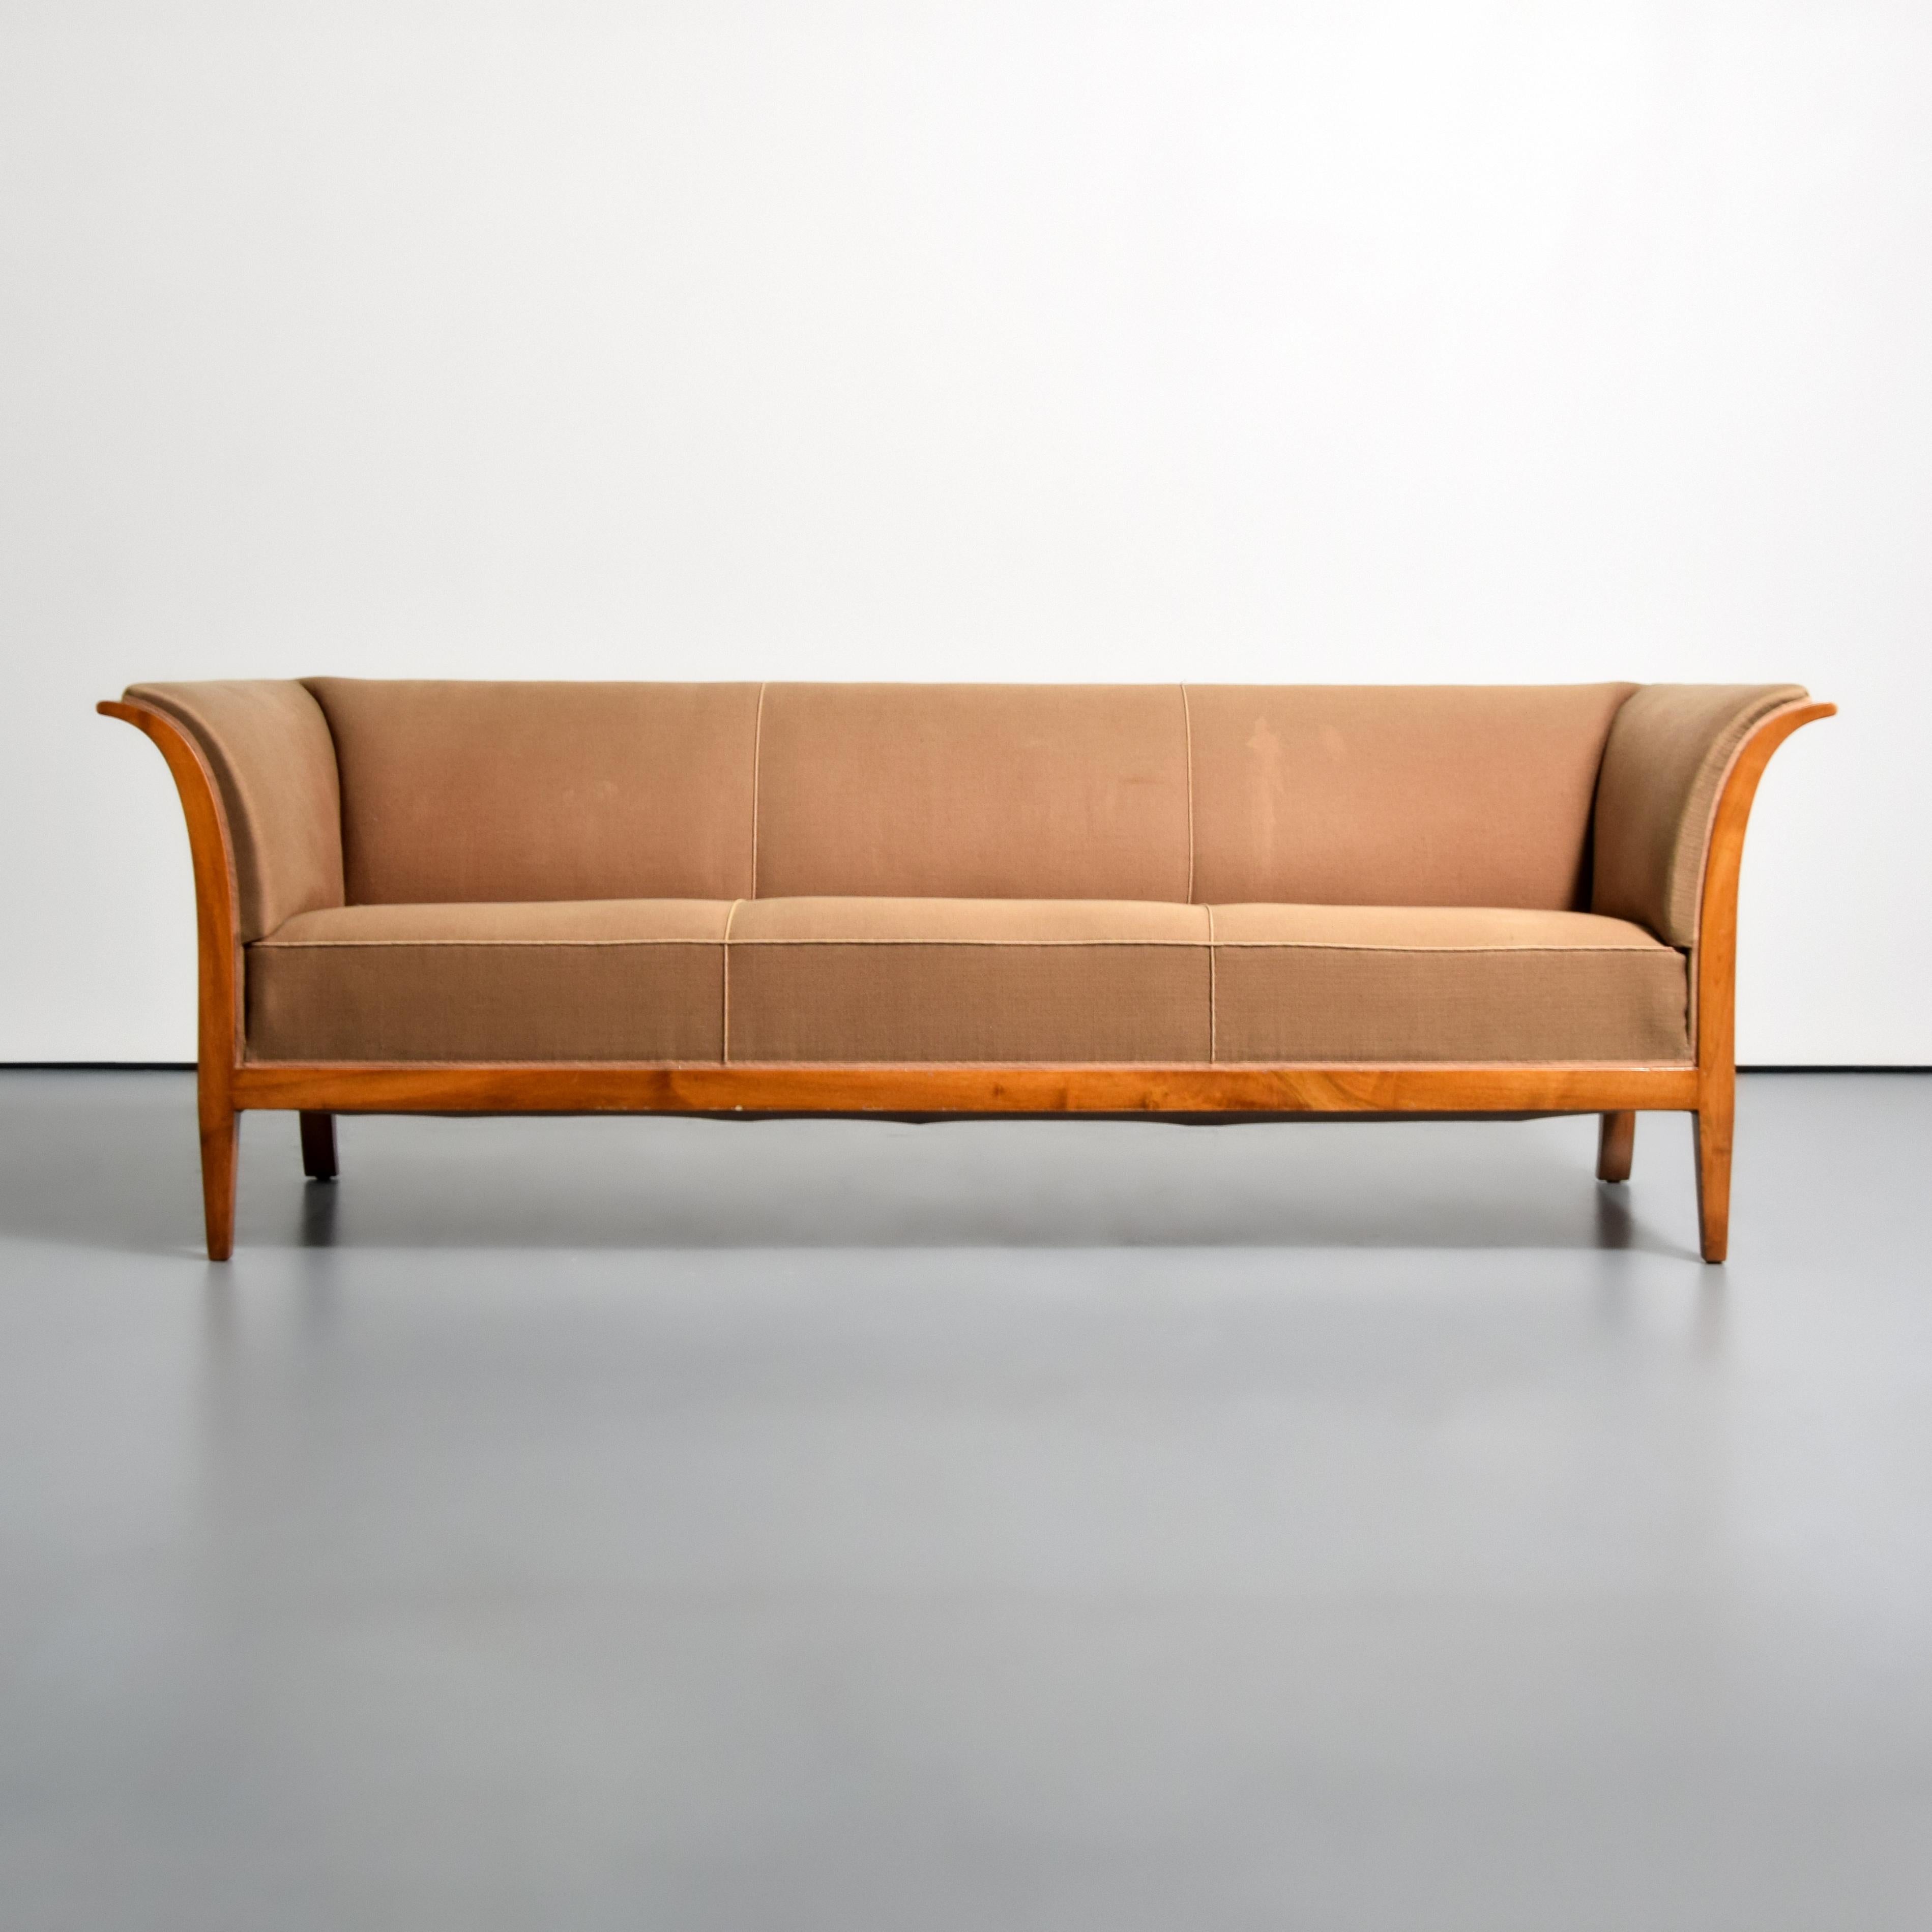 Frits Henningsen Sofa In Good Condition For Sale In Lake Worth Beach, FL